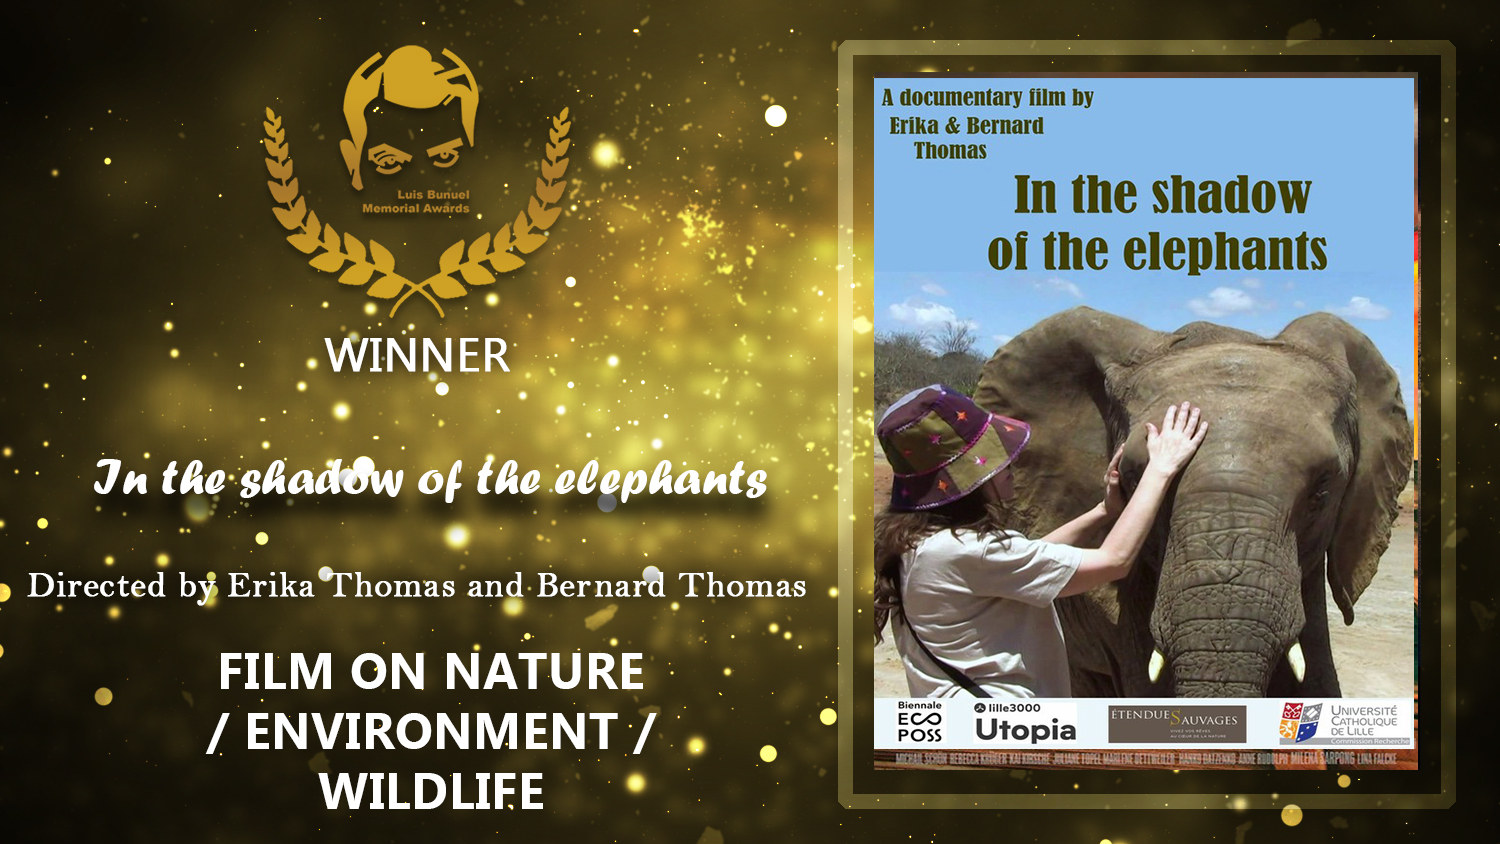 In the shadow of the elephants Film on Nature Environment Wildlife